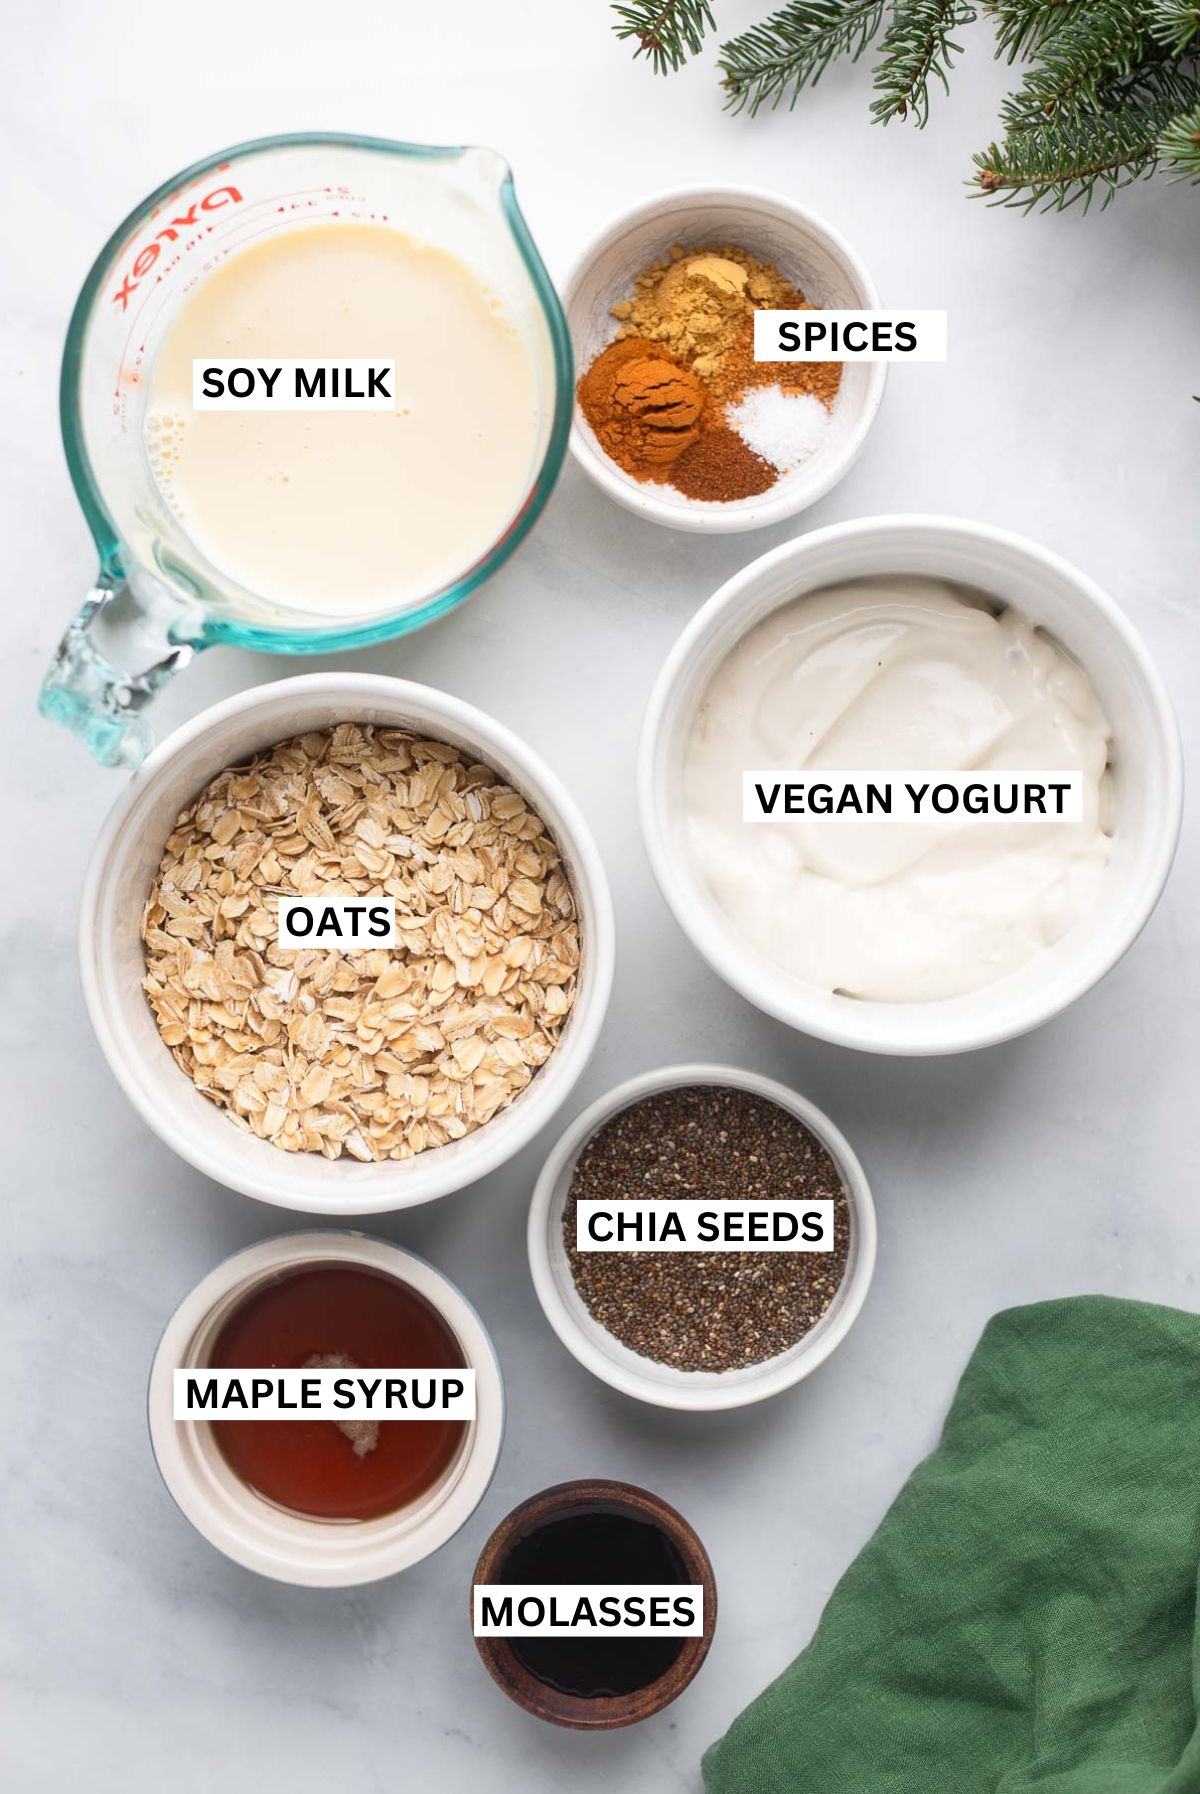 gingerbread overnight oats ingredients in small bowls on a white background with text labels.